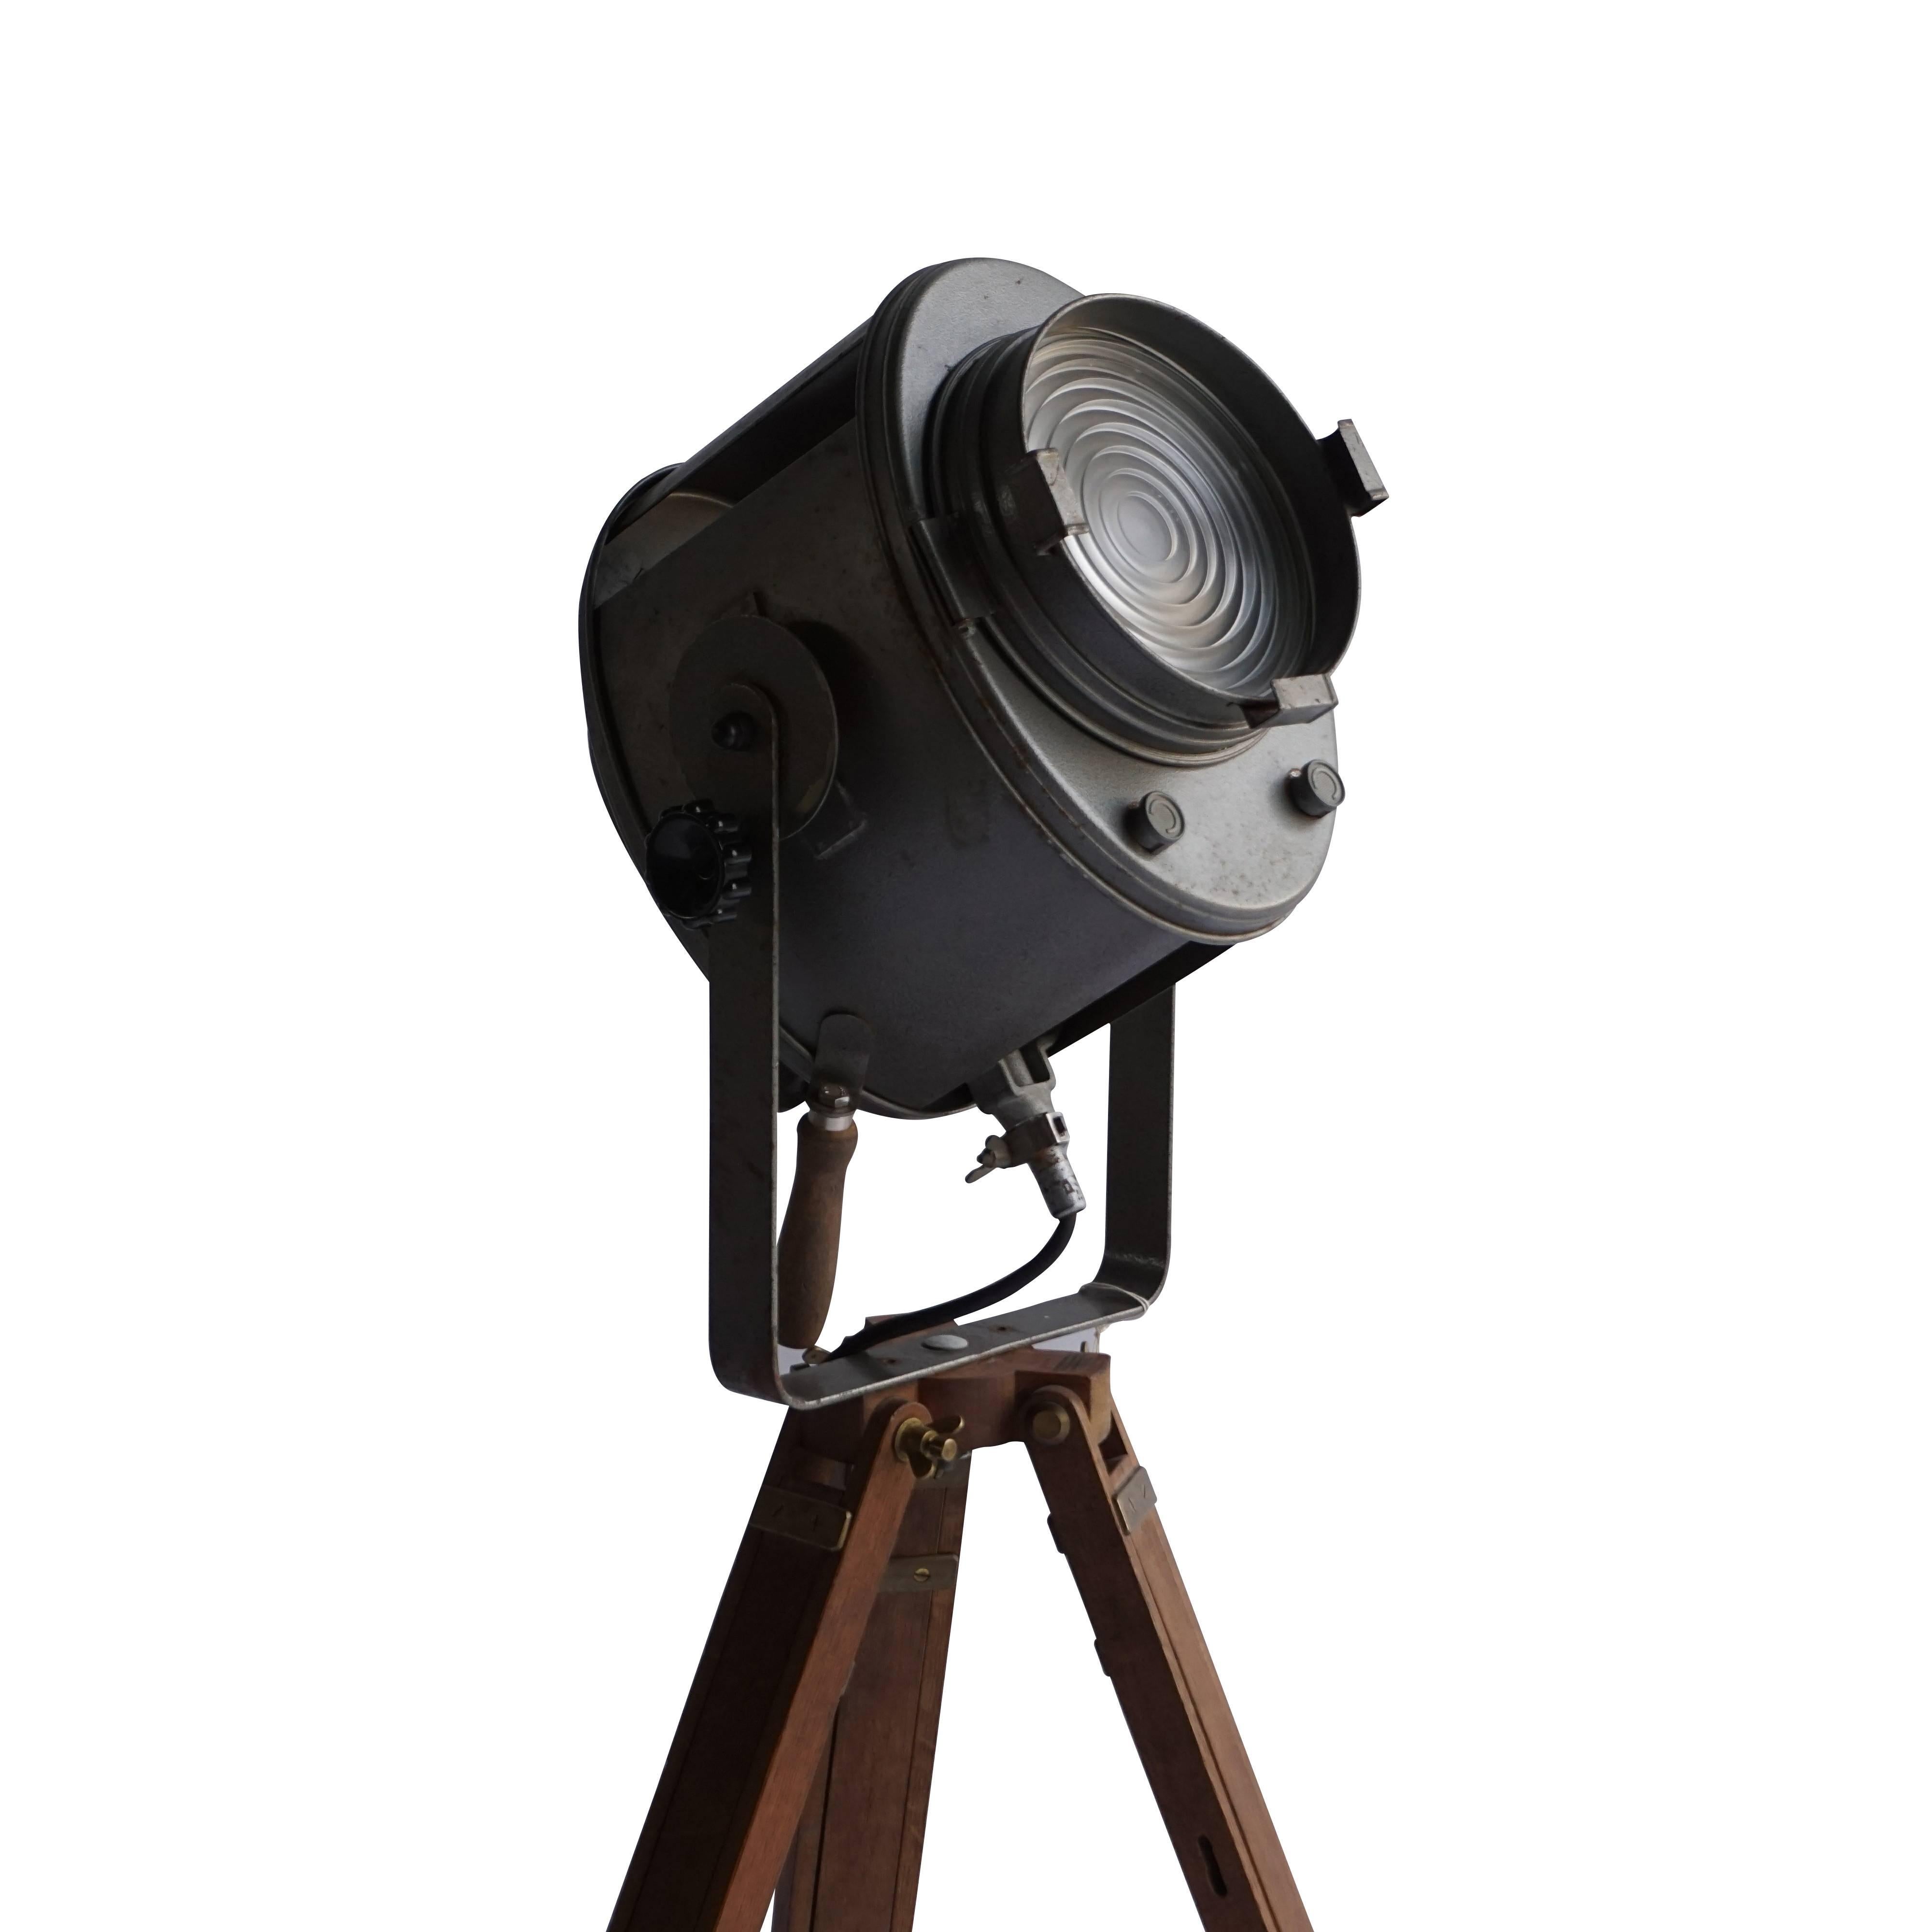 An A.E. Cremer, Paris, signed Parisian theater spotlight on a wooden vintage stand. The light is still for further use and all mechanics are functioning. Paris, 
circa 1930.